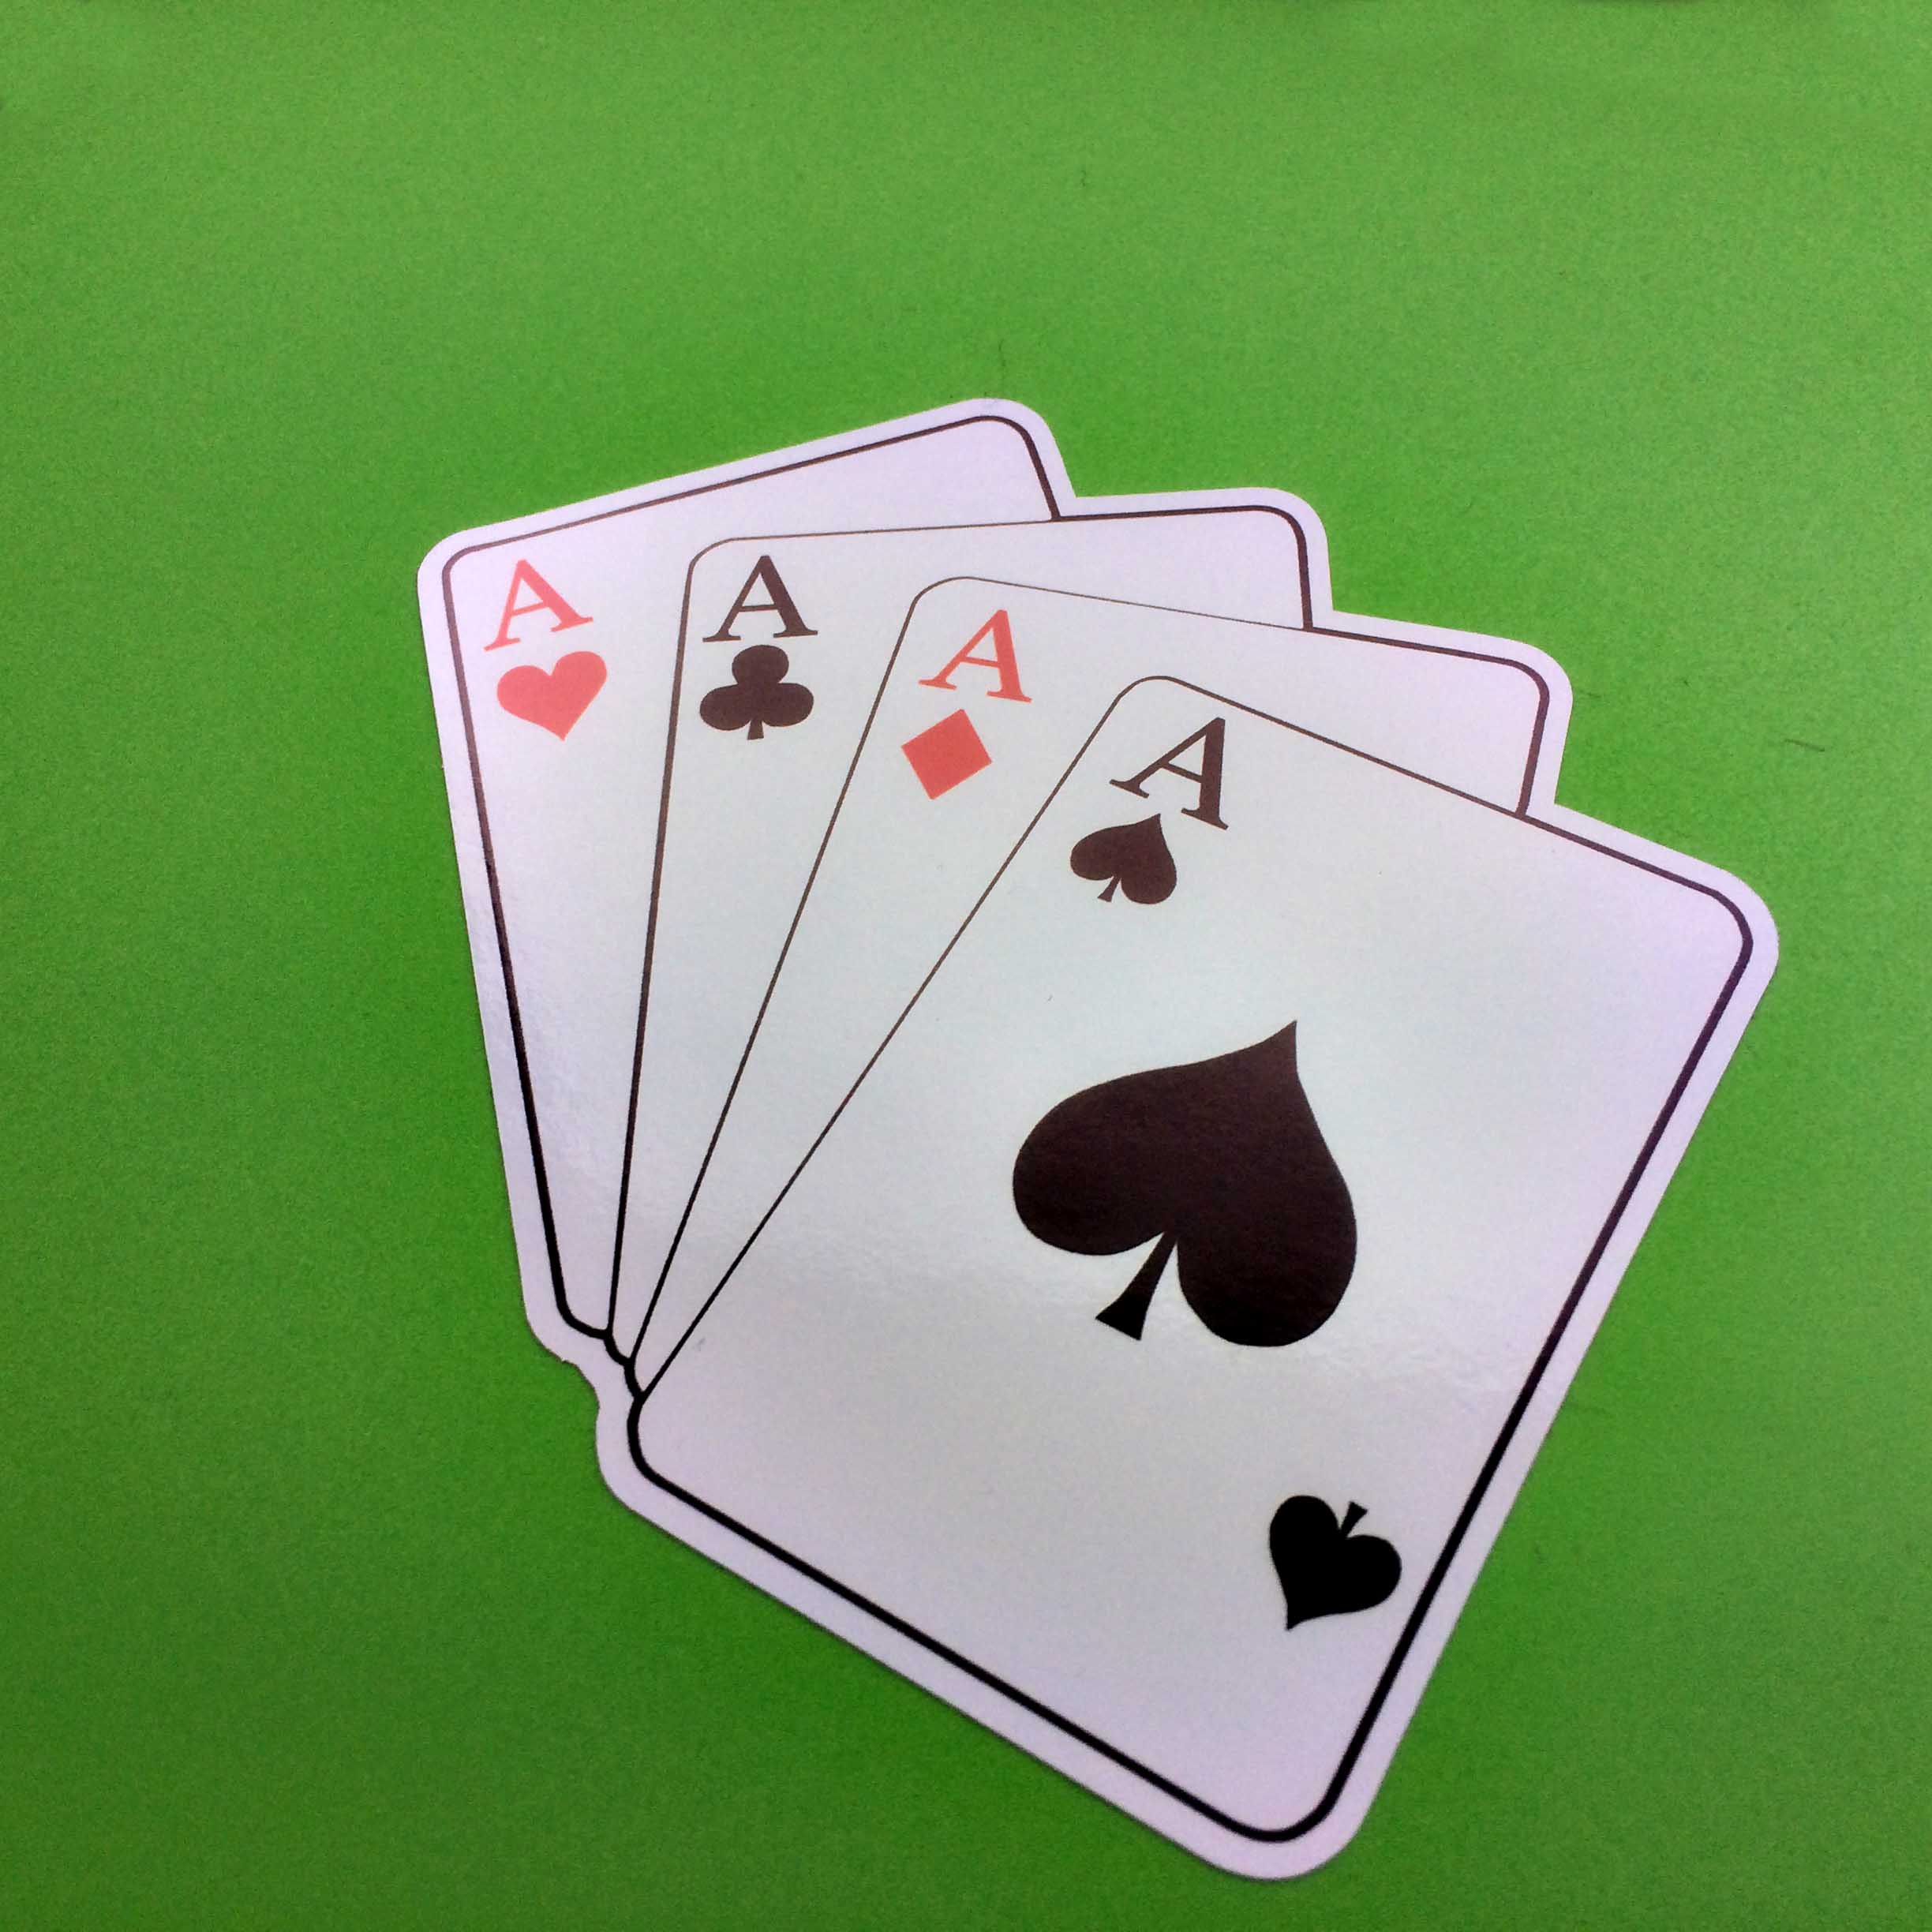 FOUR ACES PLAYING CARDS STICKER. A fan of four aces playing cards. The black ace of spades and clubs; the red ace of hearts and diamonds.